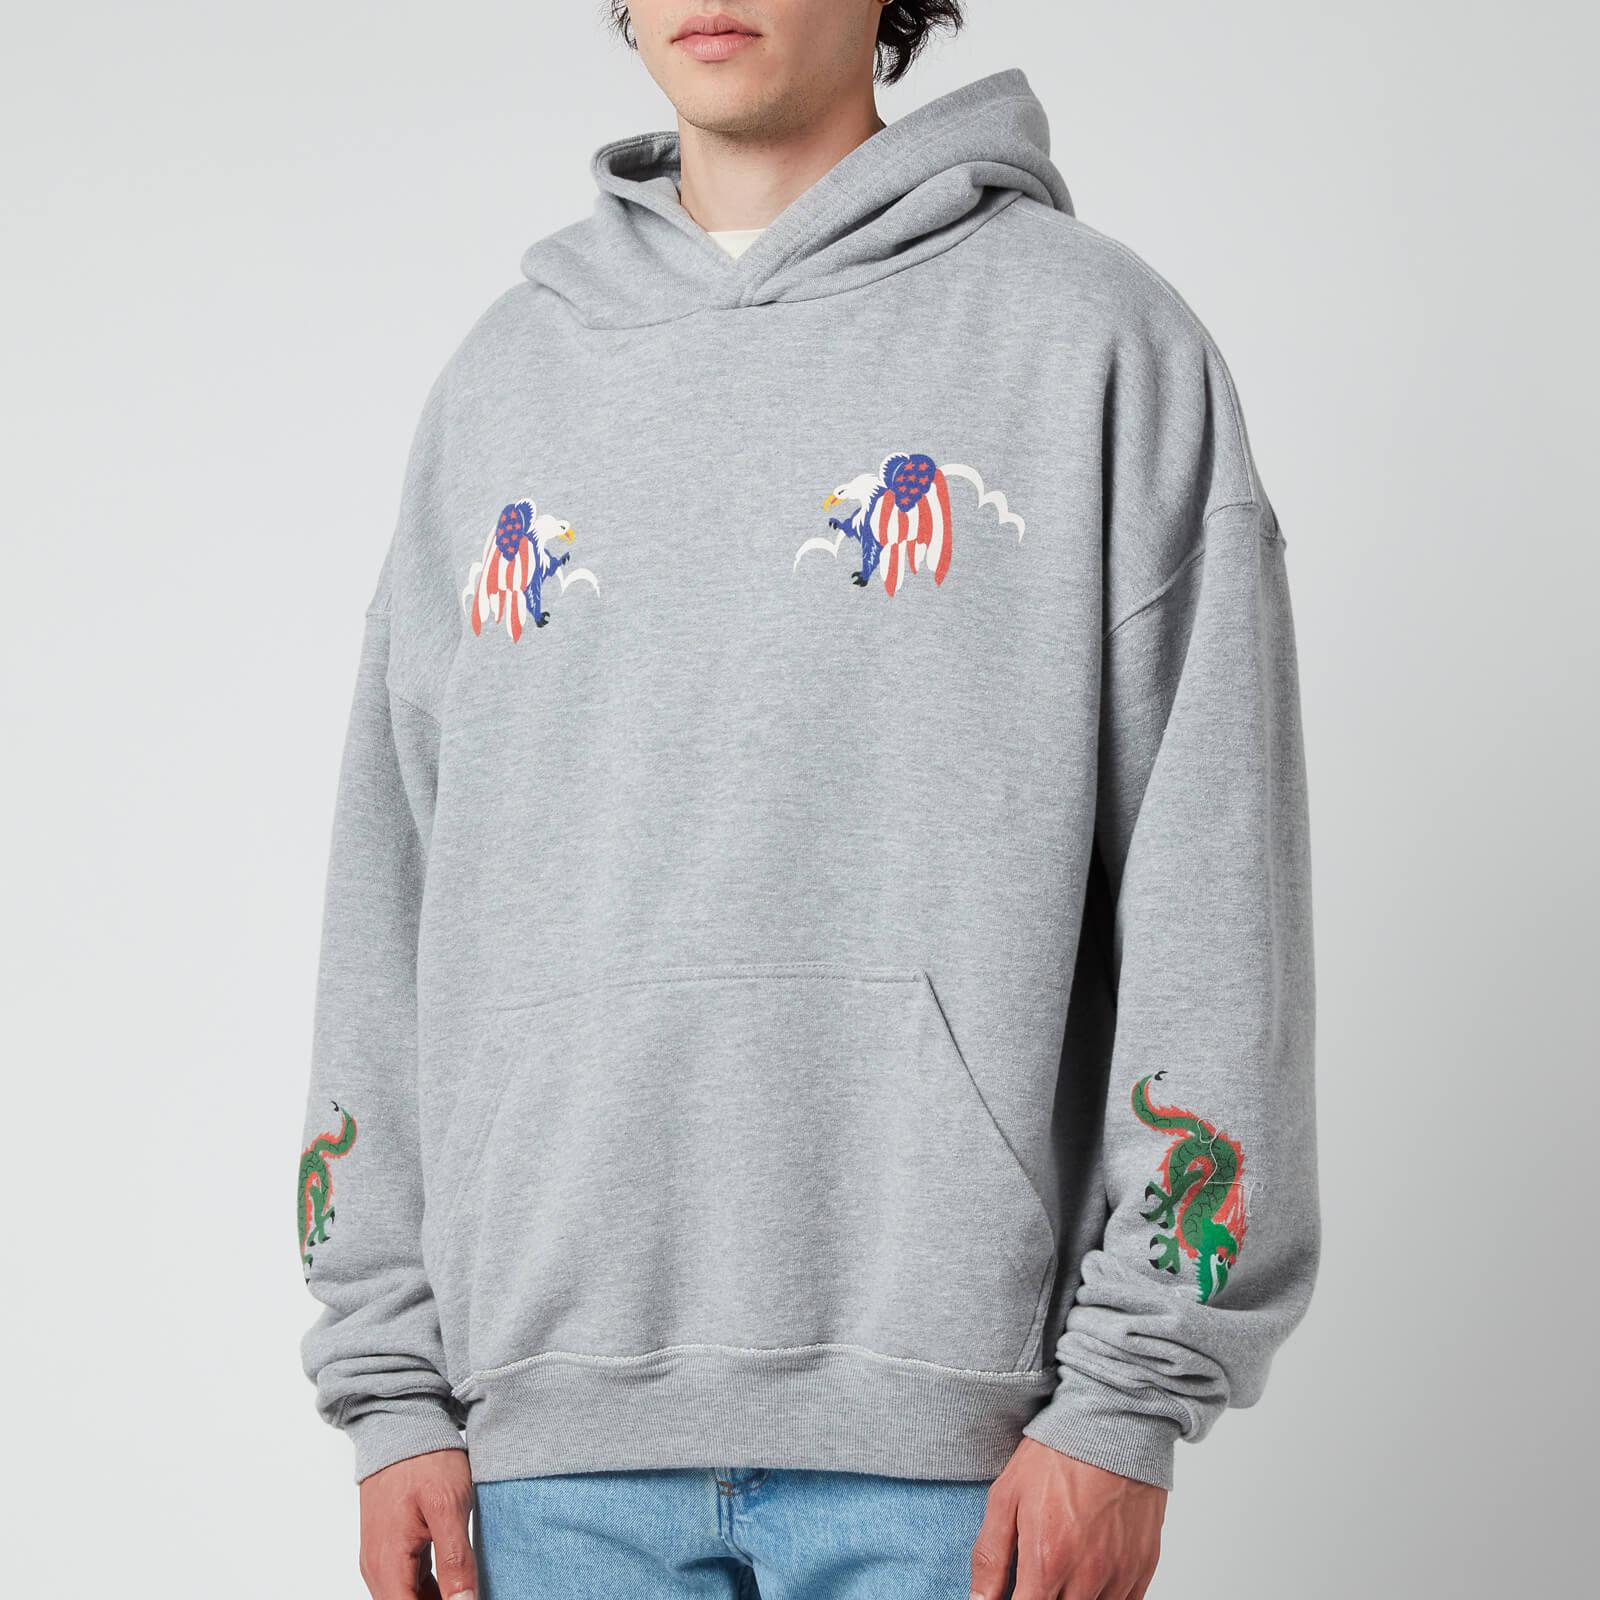 Rhude Hardcore Eagle Graphic Hoodie in Gray for Men